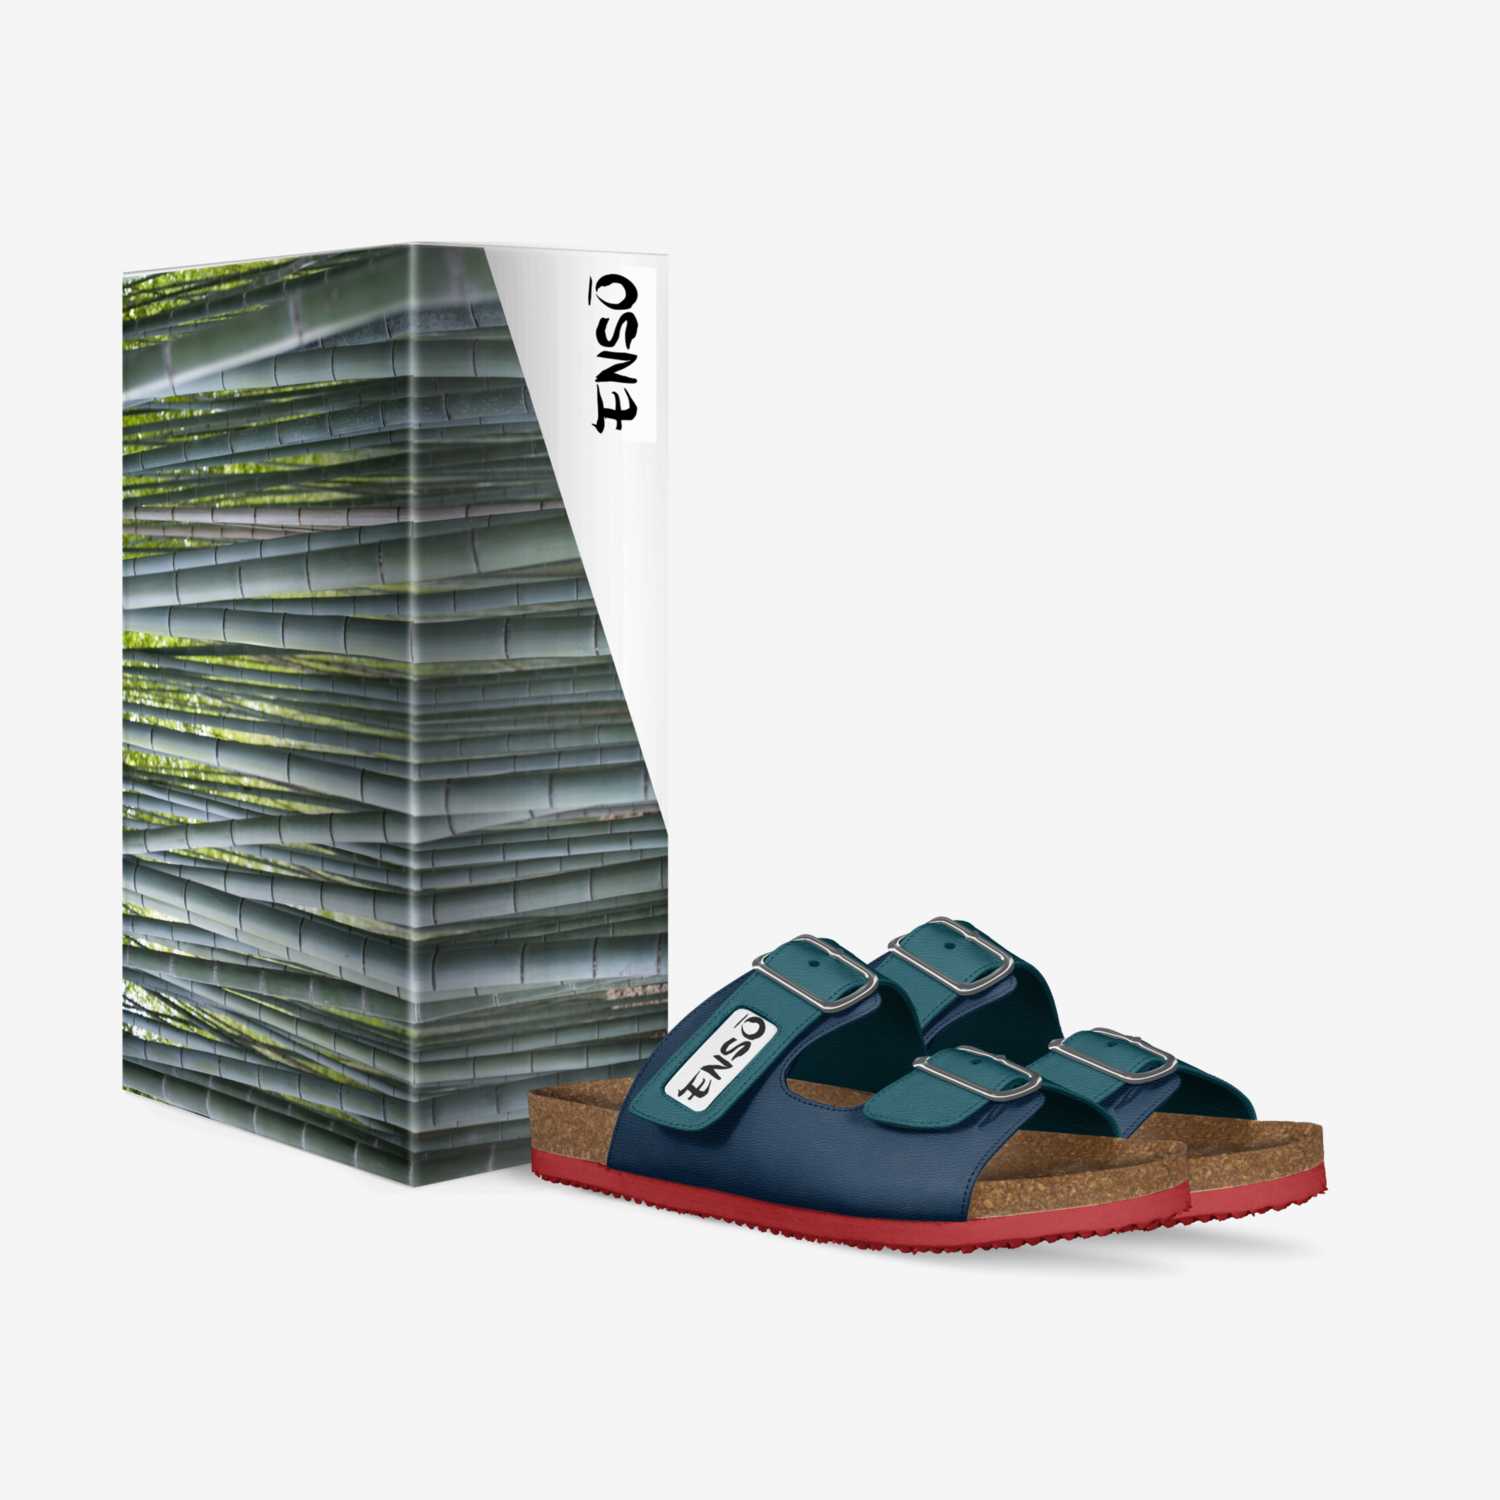 Enso Sandal custom made in Italy shoes by Enso Llc | Box view